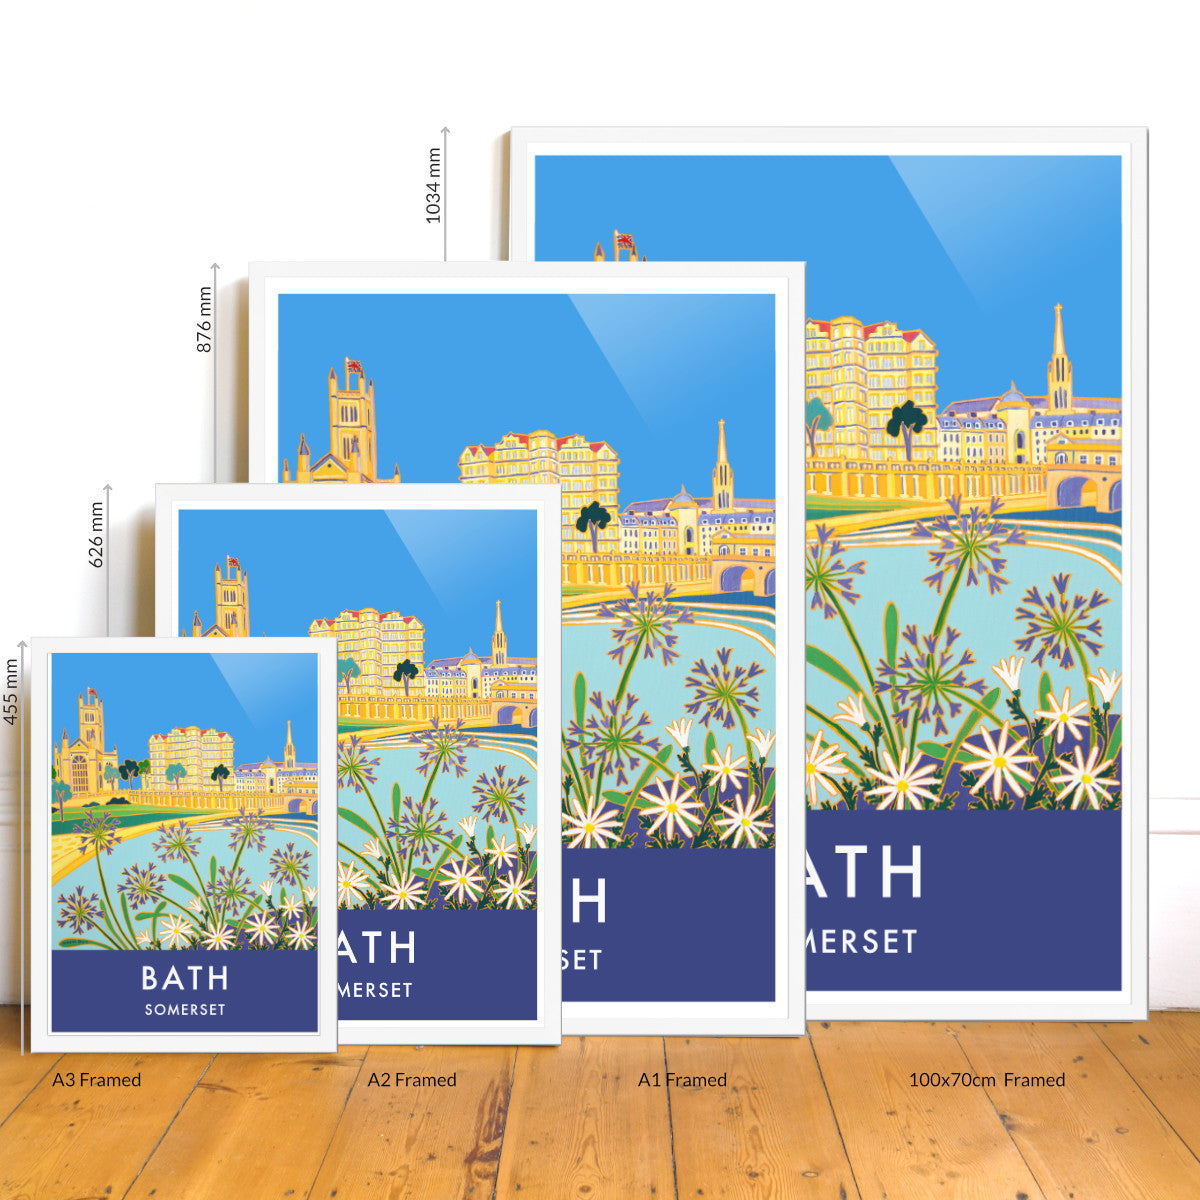 Vintage Style Travel Wall Art Poster Print by Joanne Short of Bath, Somerset